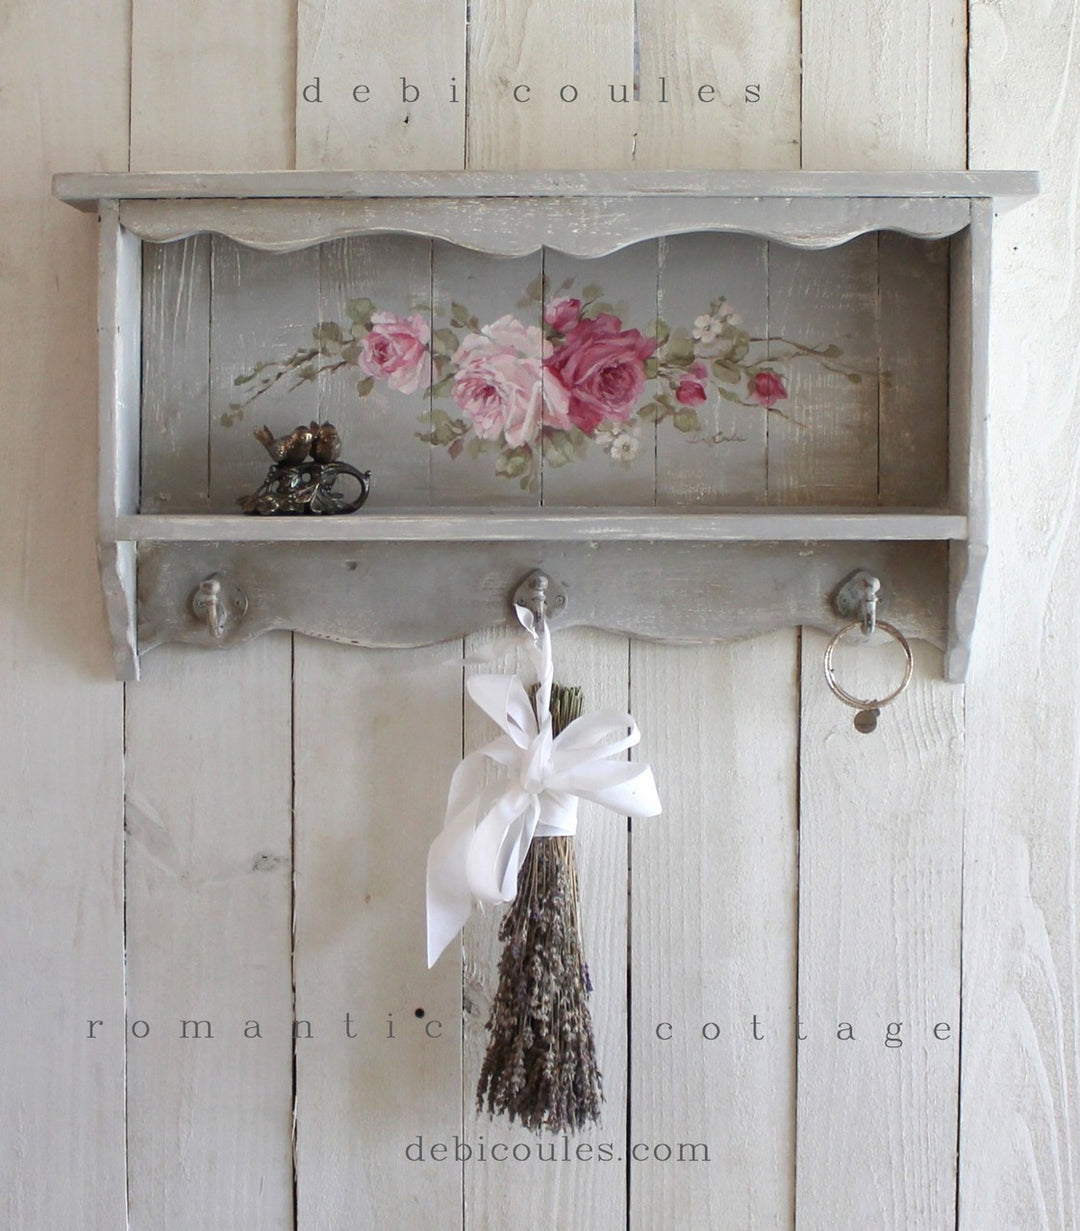 Custom Color and Decorative Vintage Style Roses Shelf